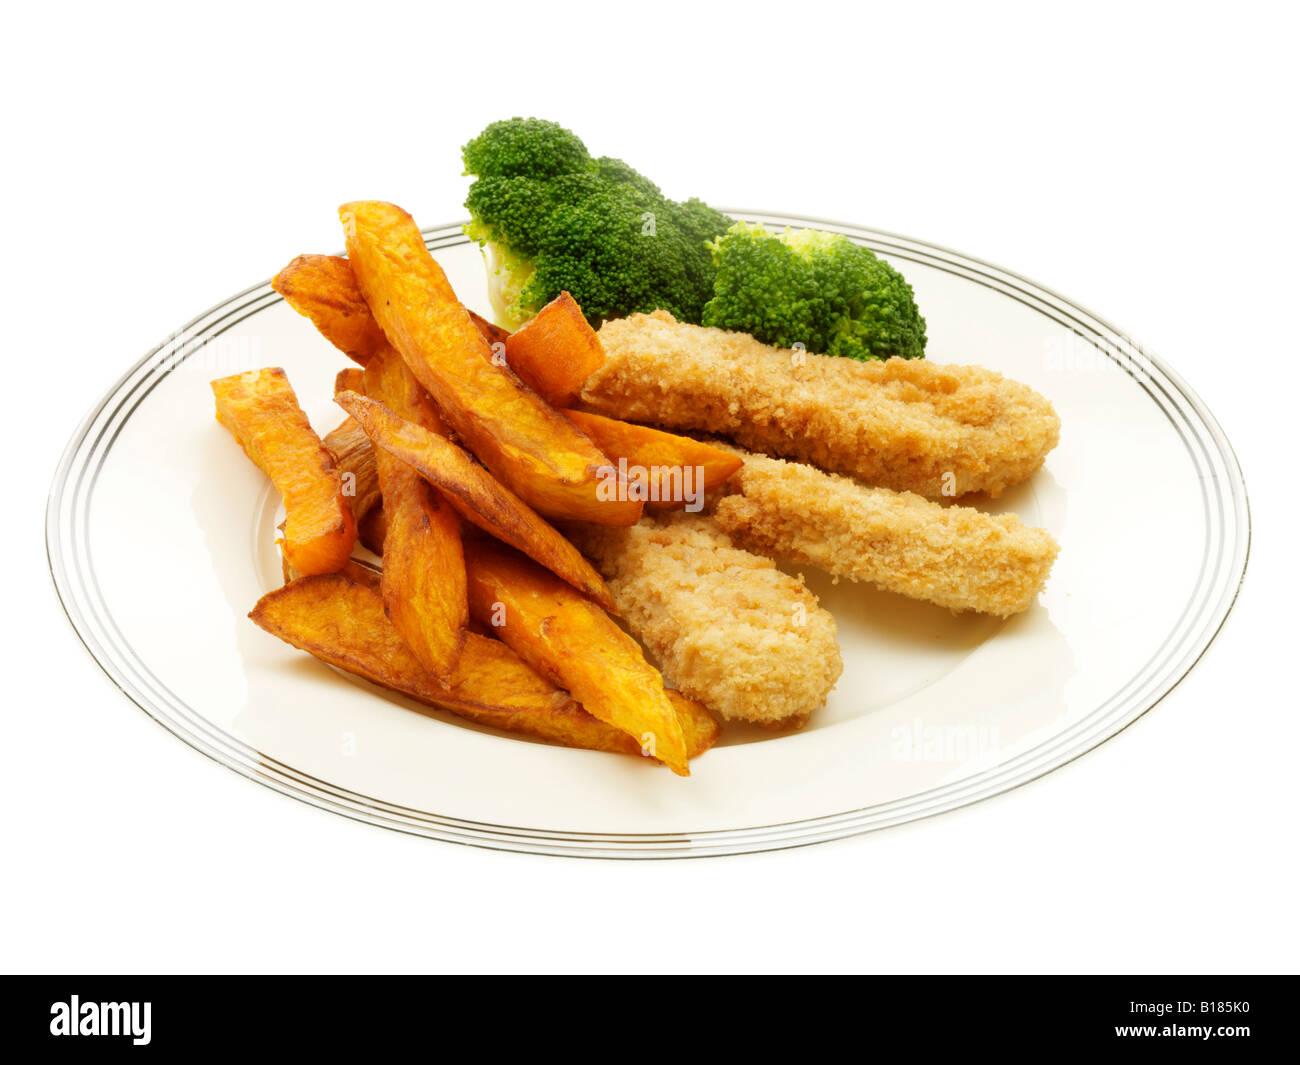 Breaded Chicken Strips with Sweet Potato Chips and Broccoli Stock Photo